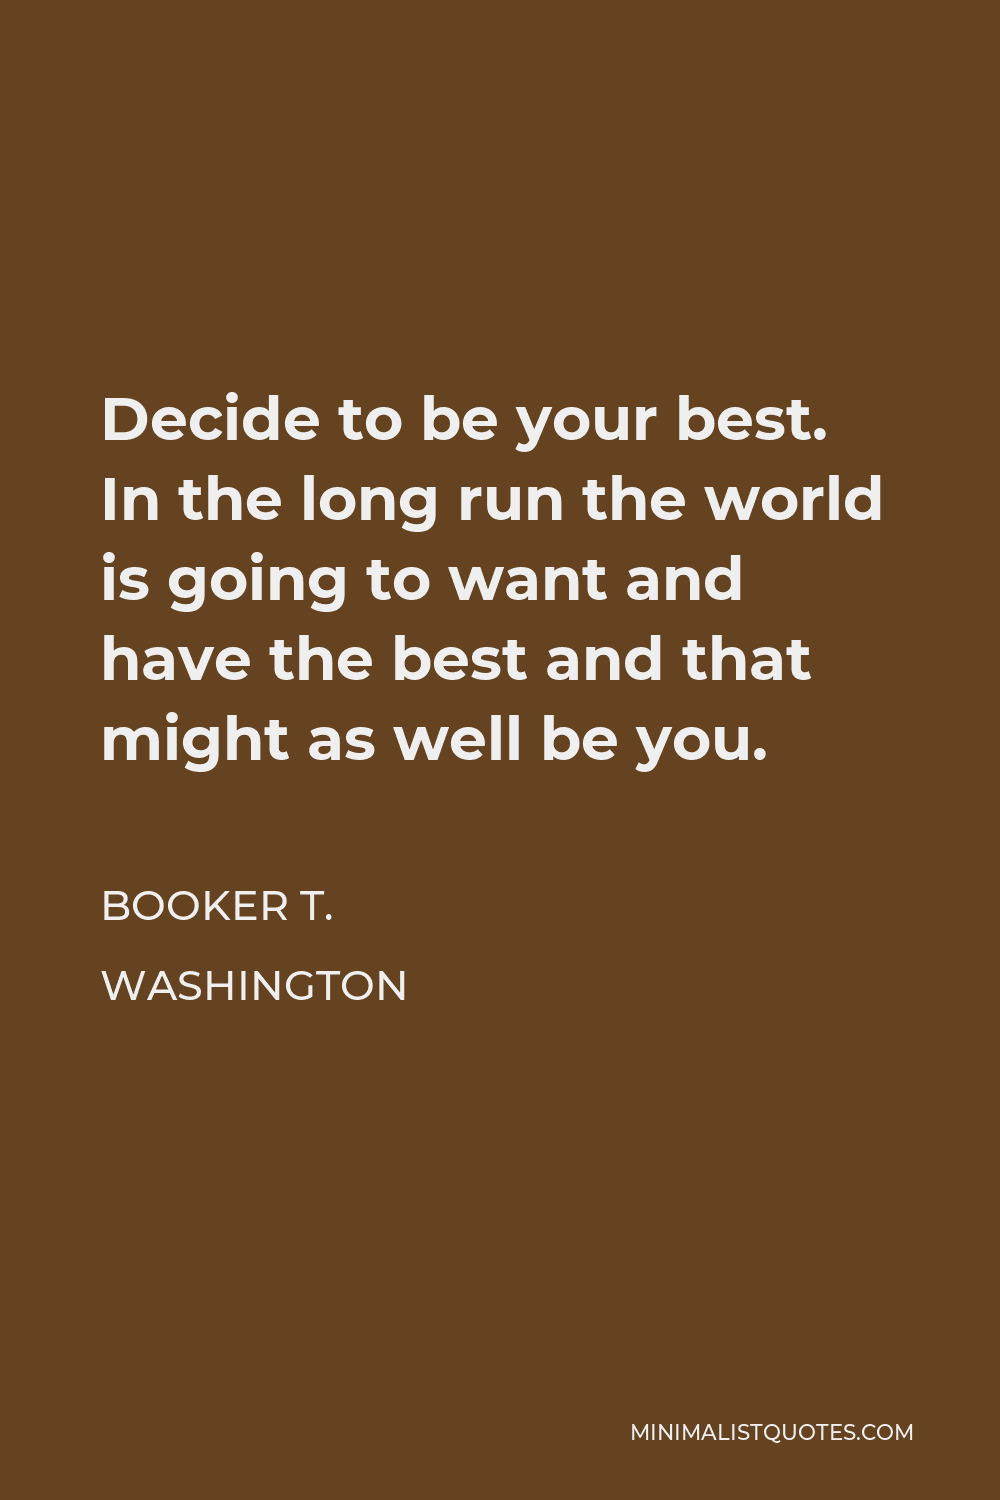 Booker T. Washington Quote - Decide to be your best. In the long run the world is going to want and have the best and that might as well be you.